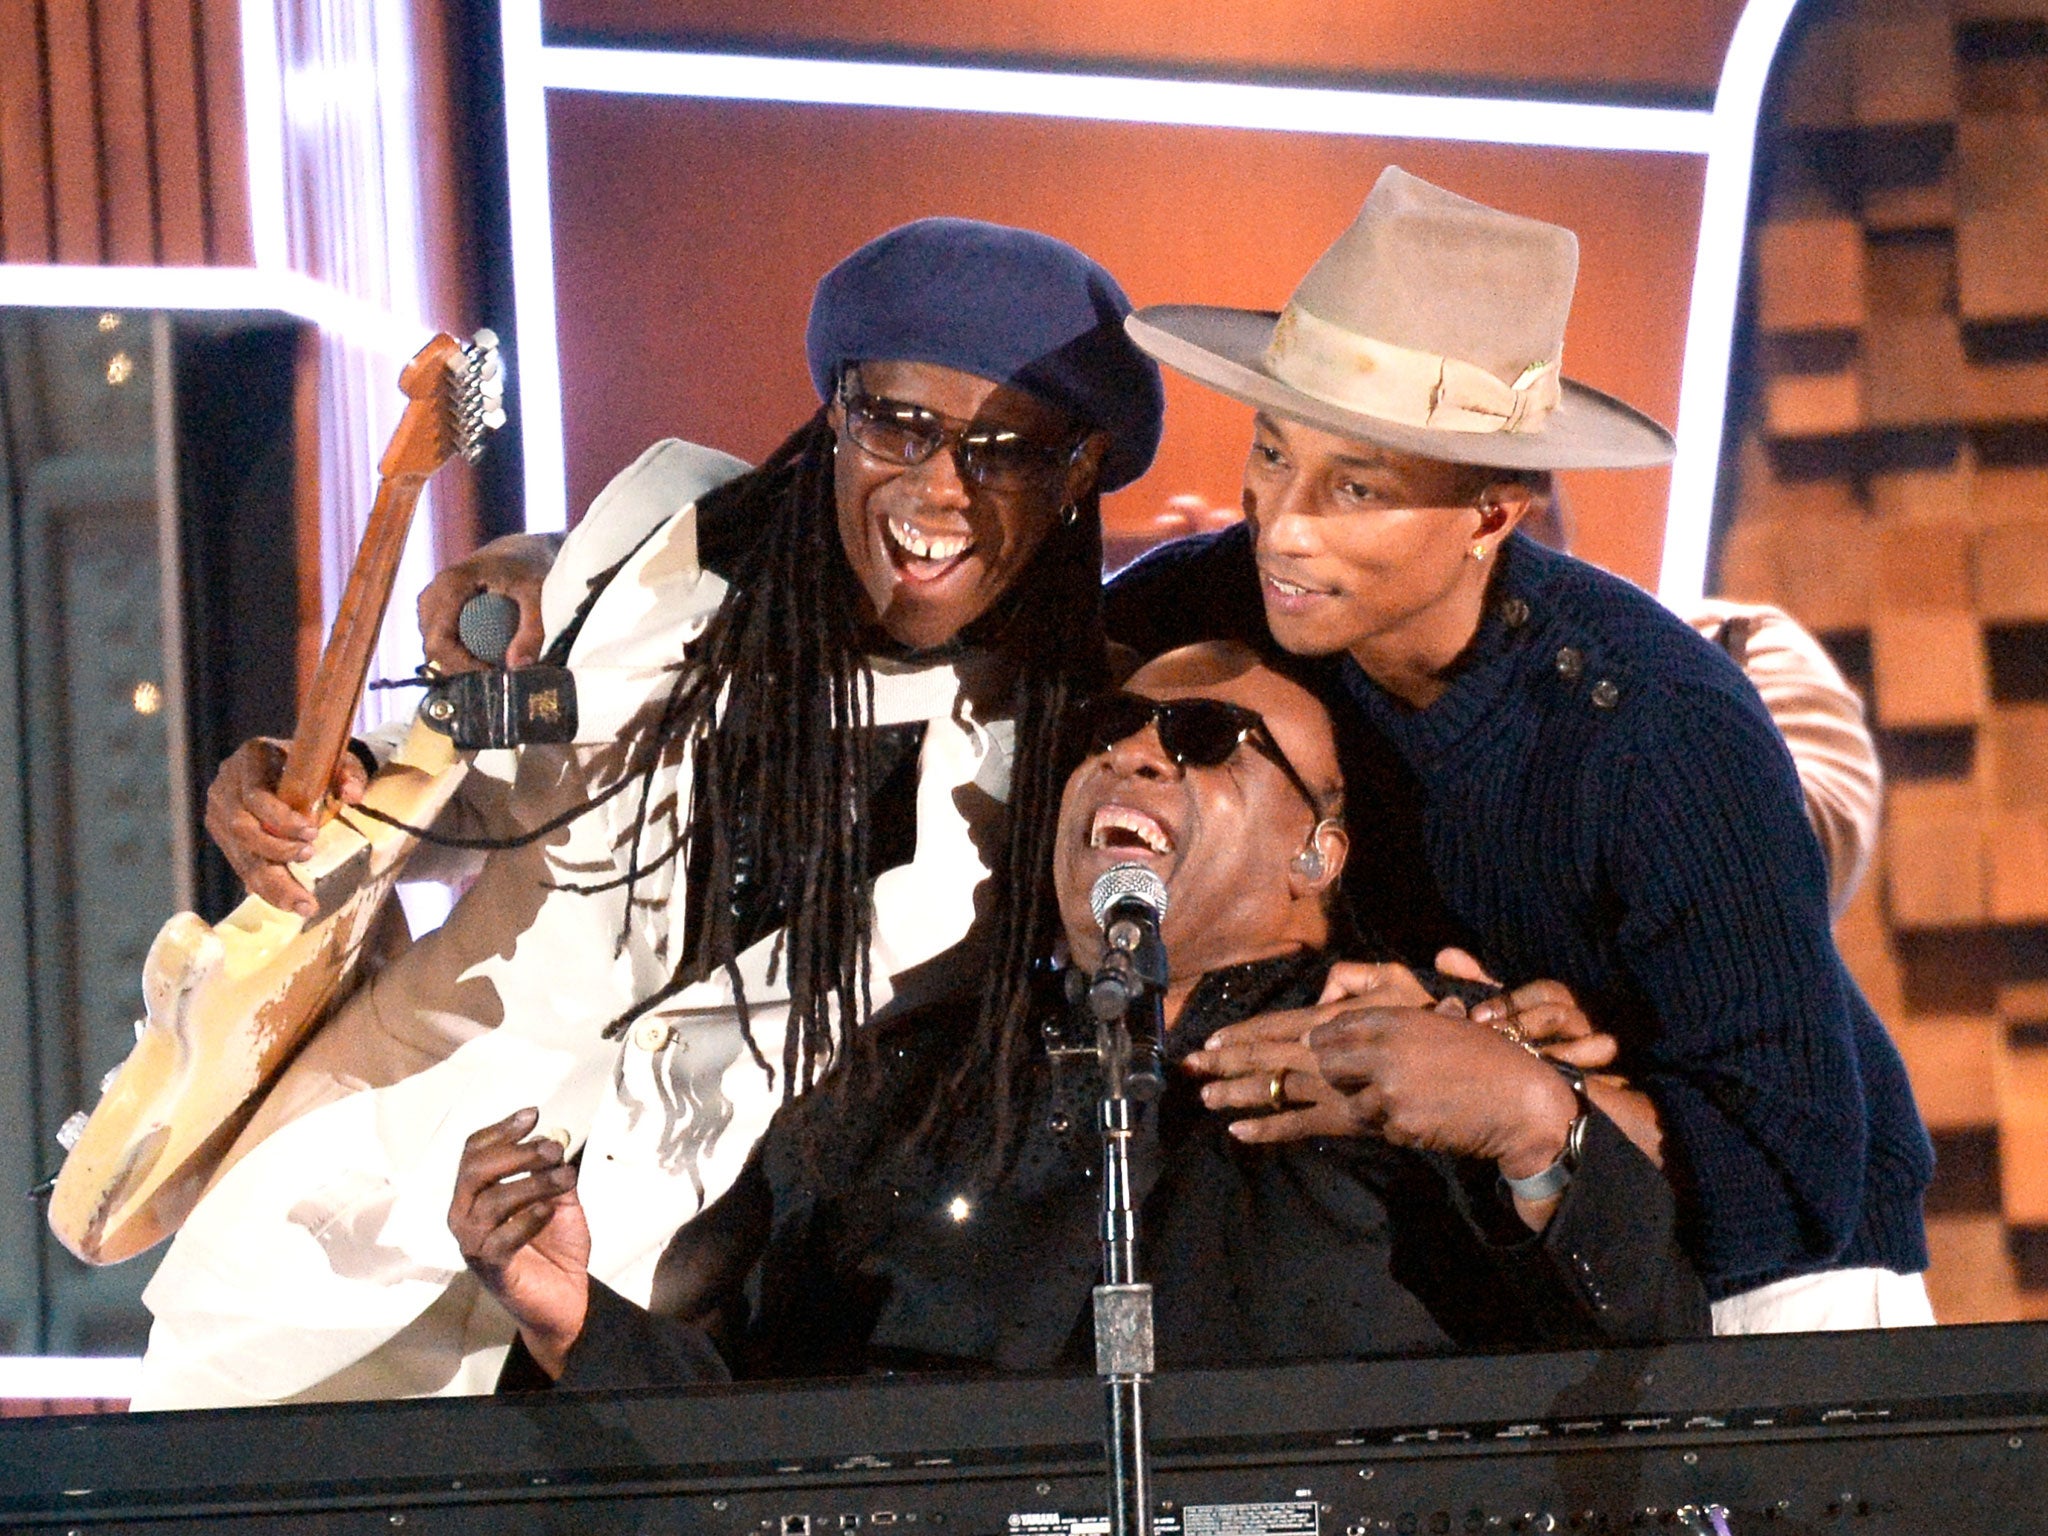 Musicians Nile Rodgers, Stevie Wonder and Pharrell Williams perform onstage